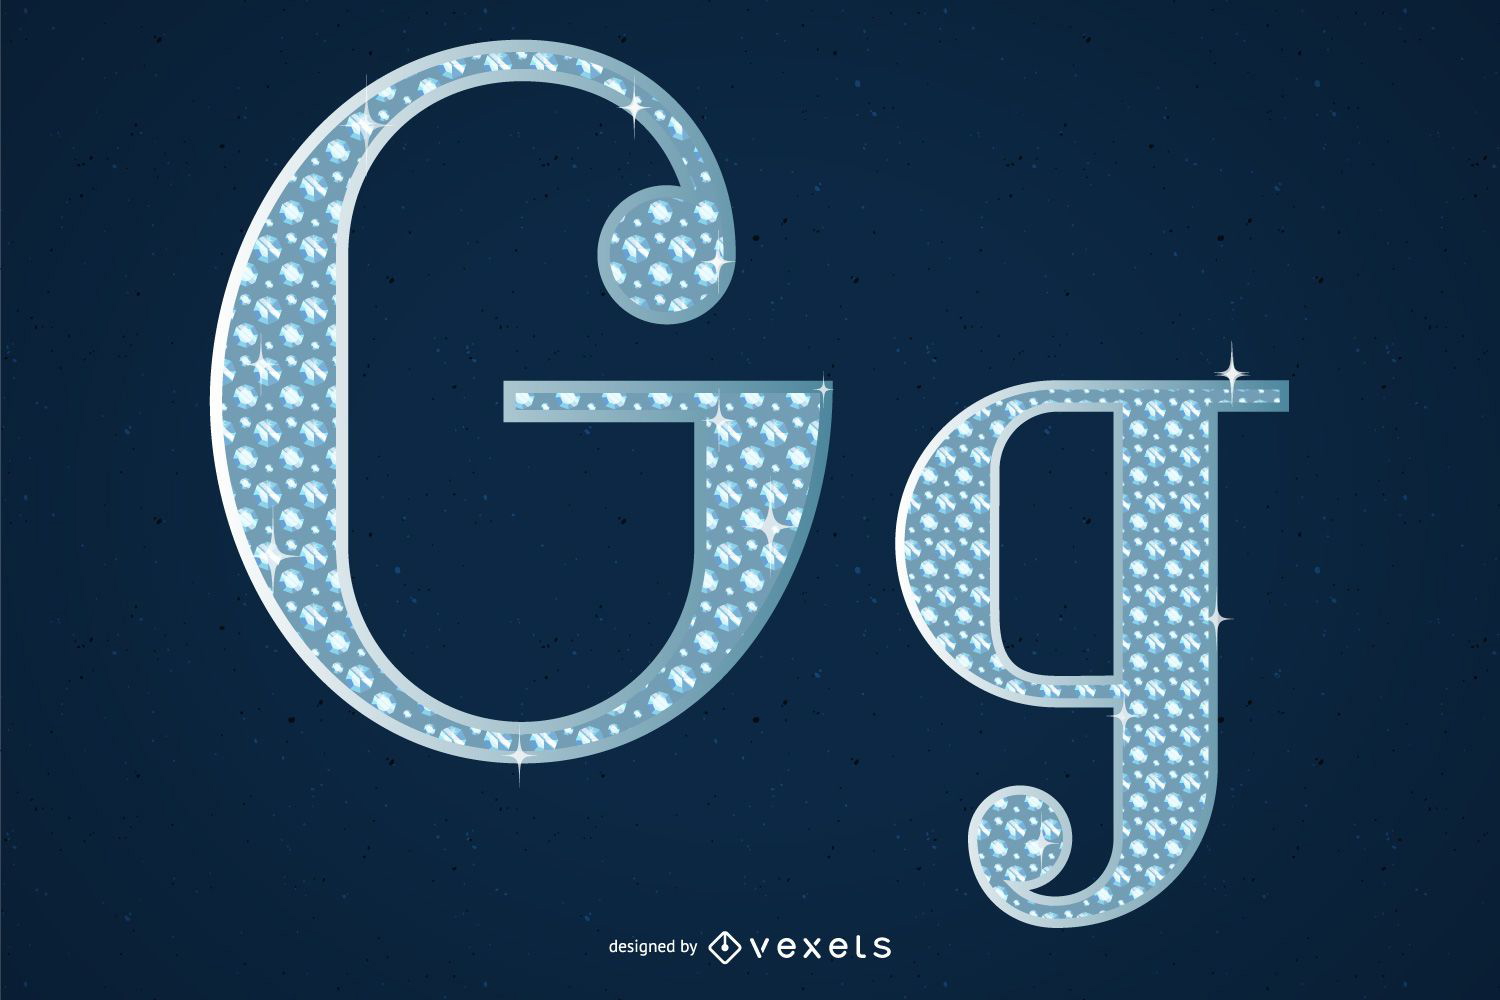 Diamond Embedded In The English Alphabet Arabic Numerals And Symbols Vector